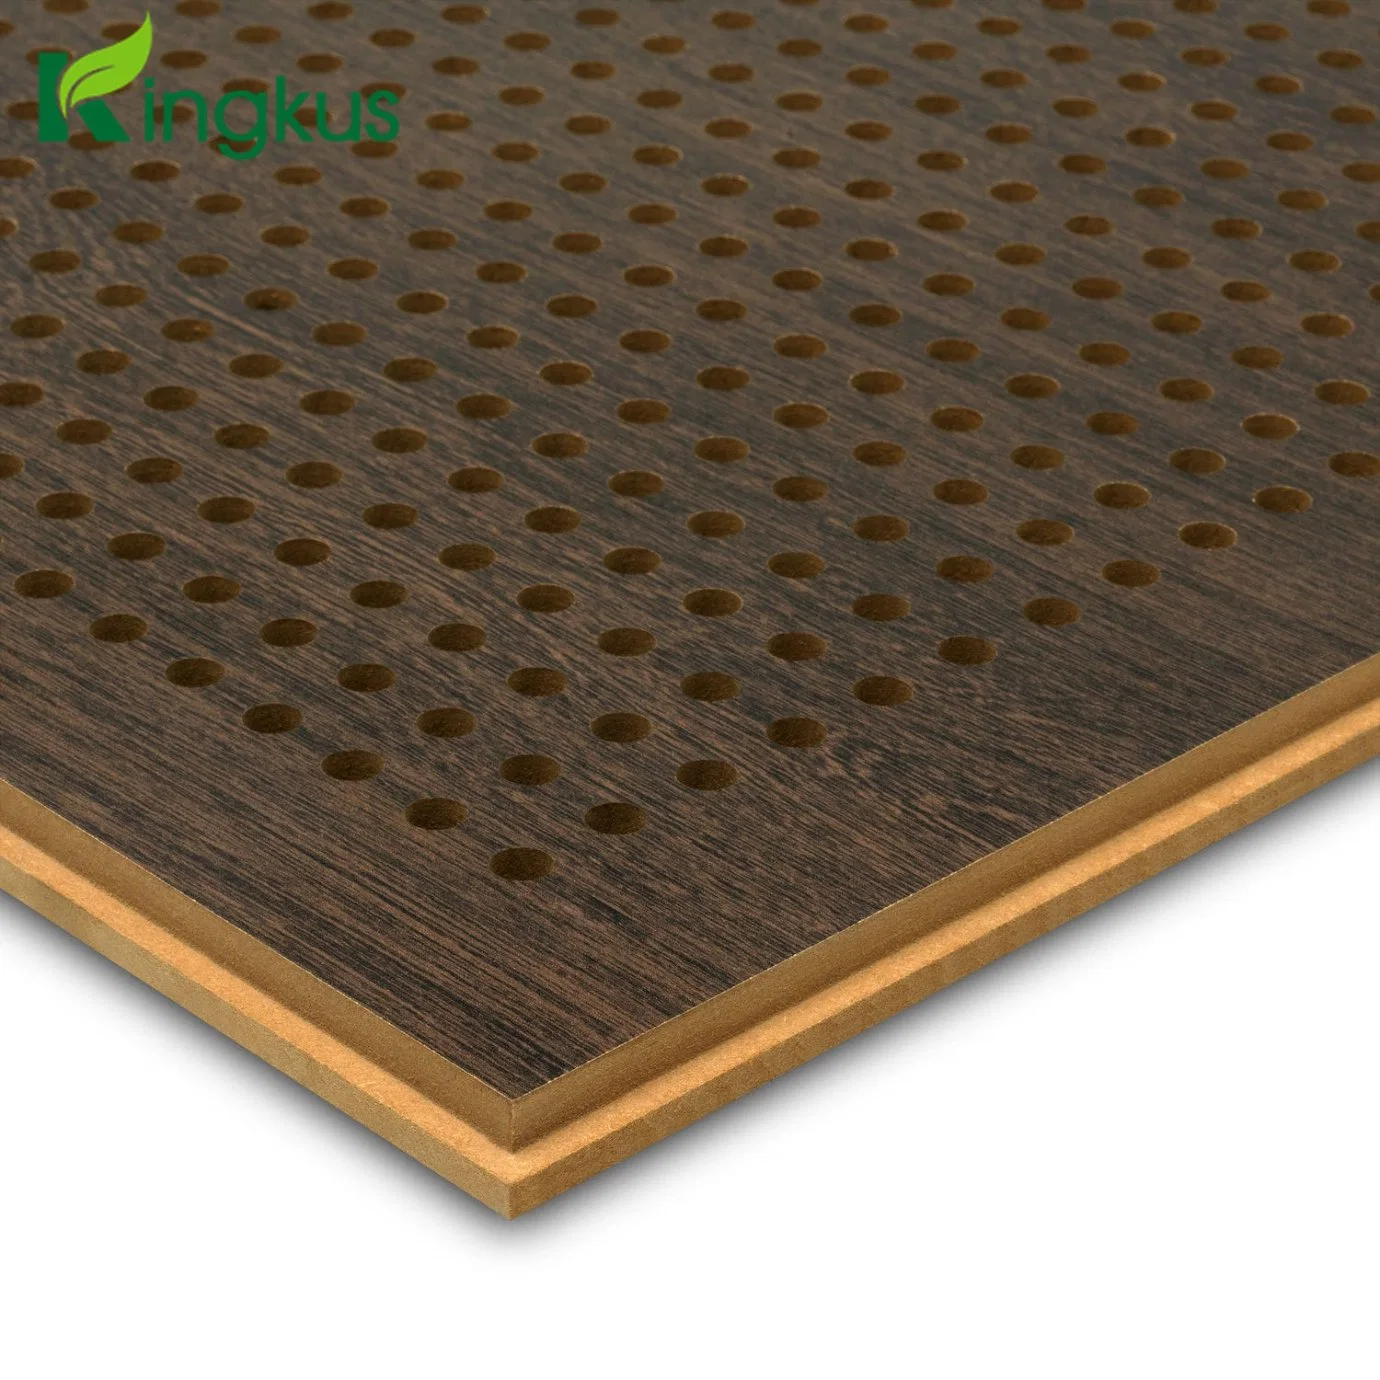 Pl616 MDF Wooden Perforated Acoustic Board for Auditorium